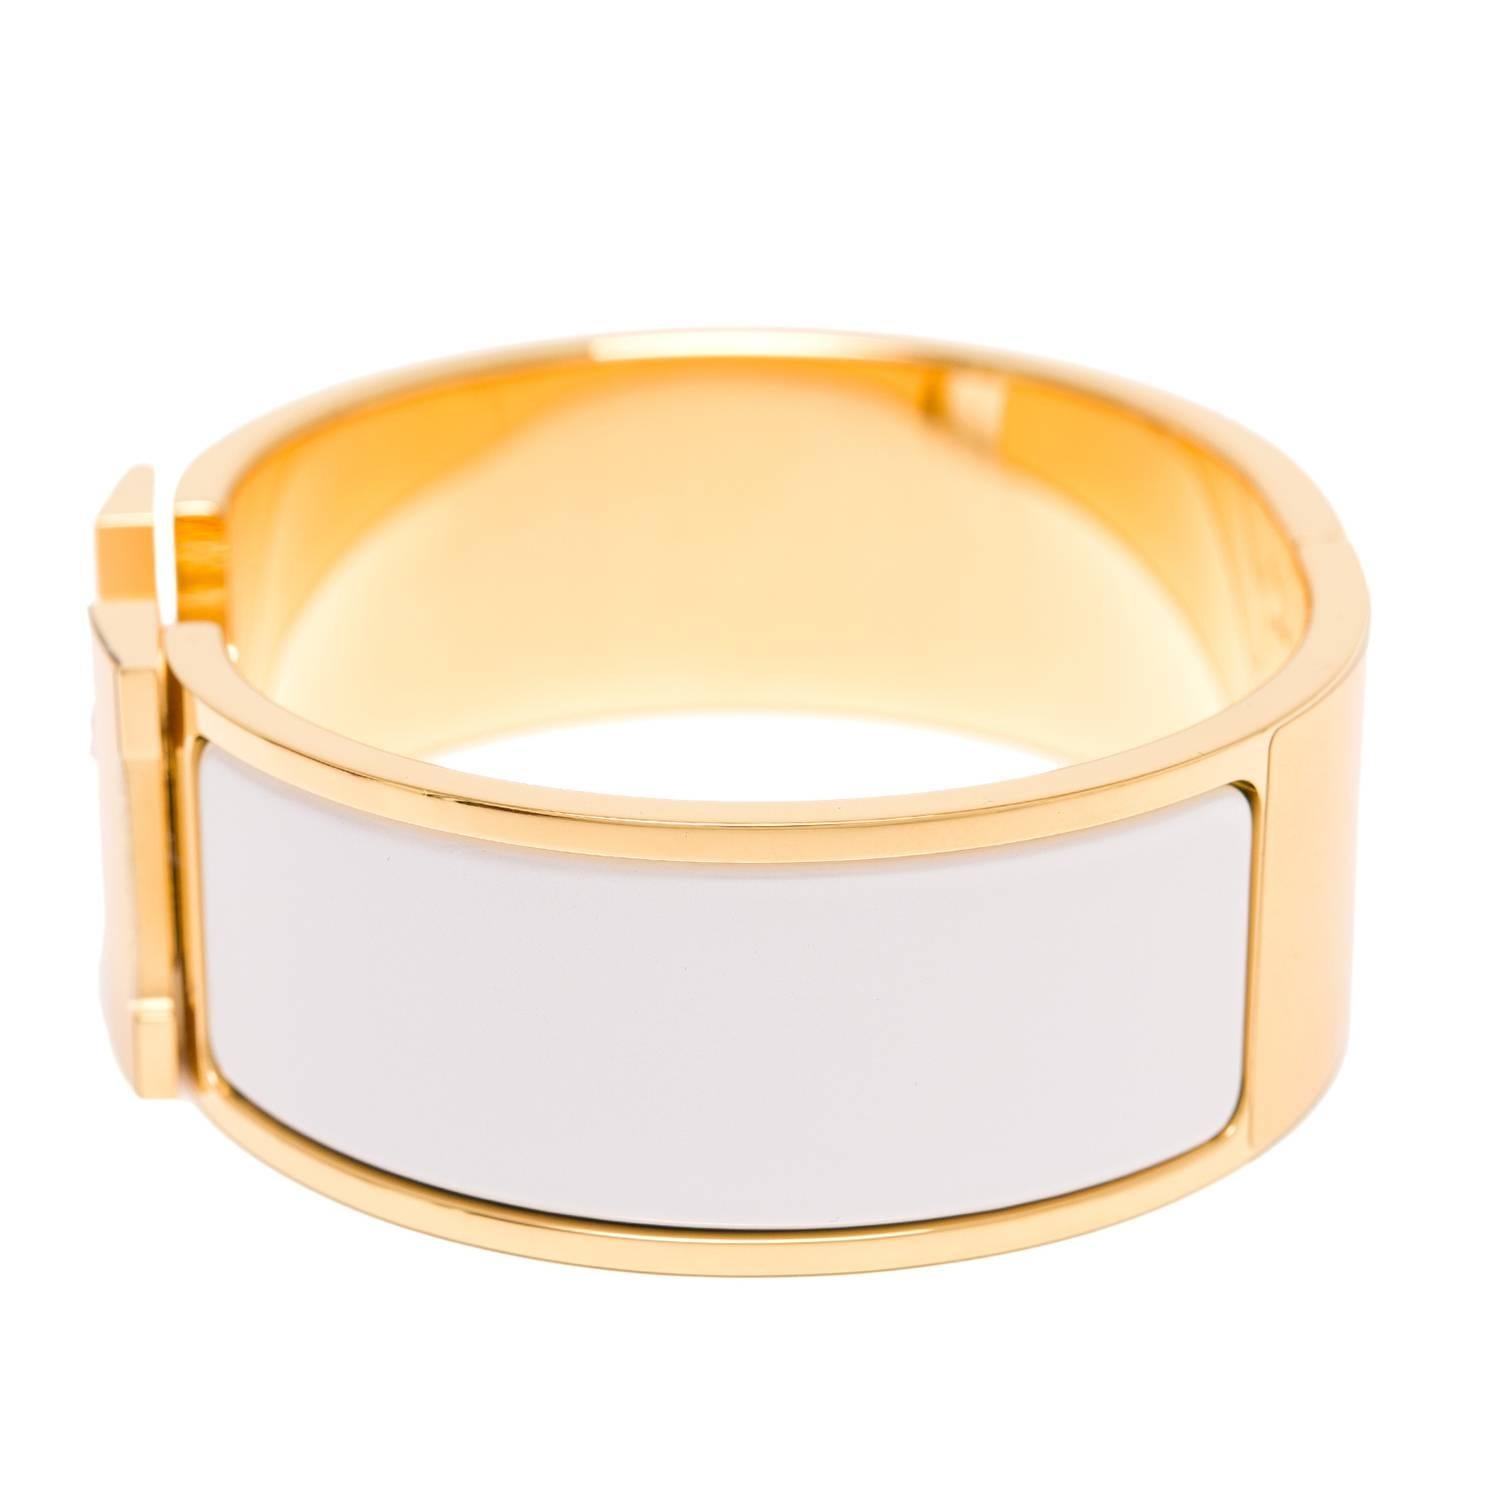  	
Hermes wide Clic Clac H bracelet in White enamel with gold plated hardware in size PM.

Origin: France

Condition: Pristine, store fresh condition

Accompanied by: Hermes box, dustbag, carebook, ribbon

Measurements: Diameter: 2.25